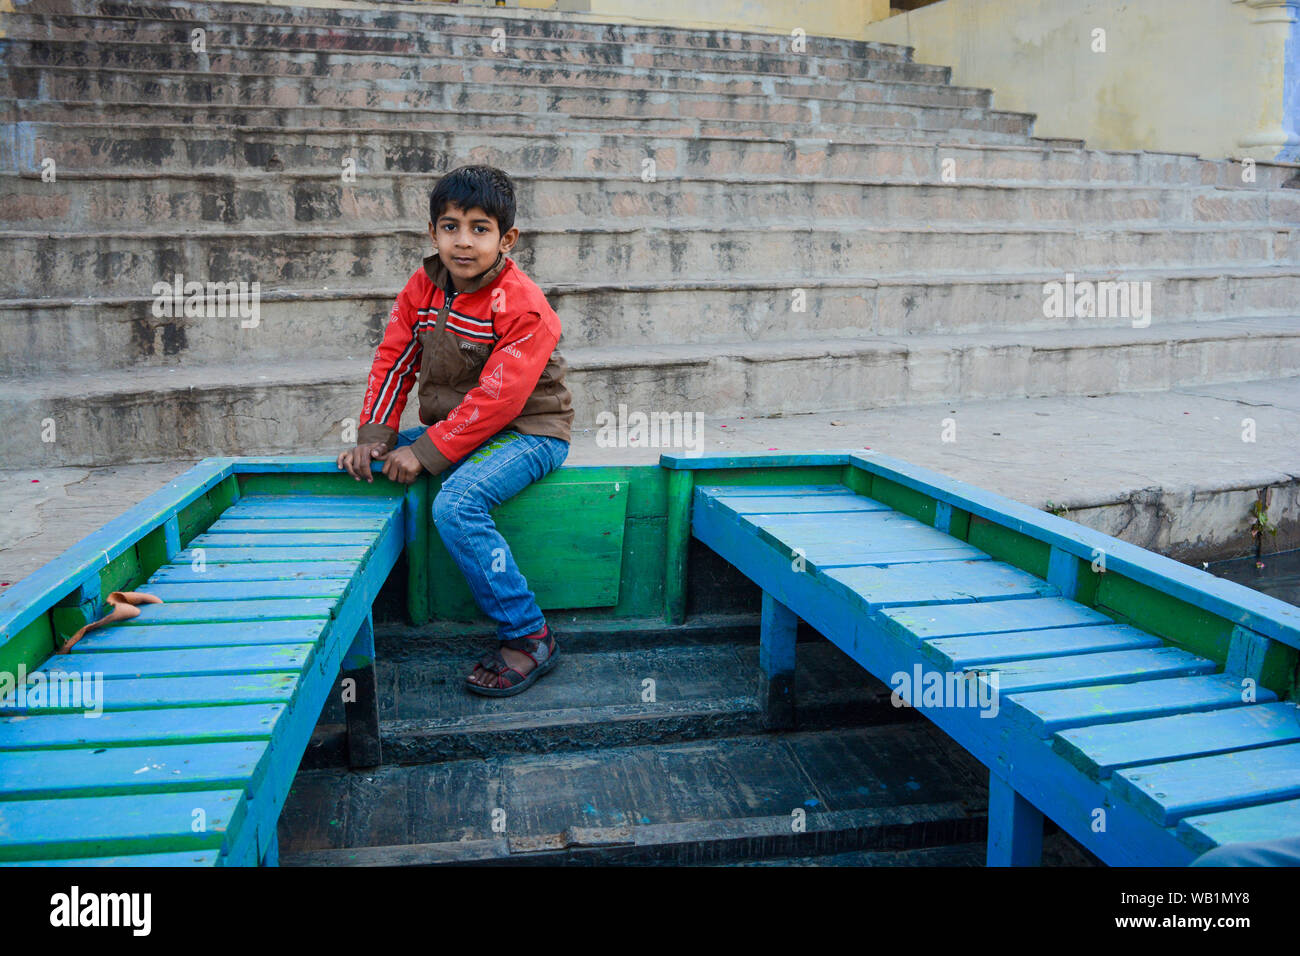 Indian poor kid playing around the blue boat Stock Photo